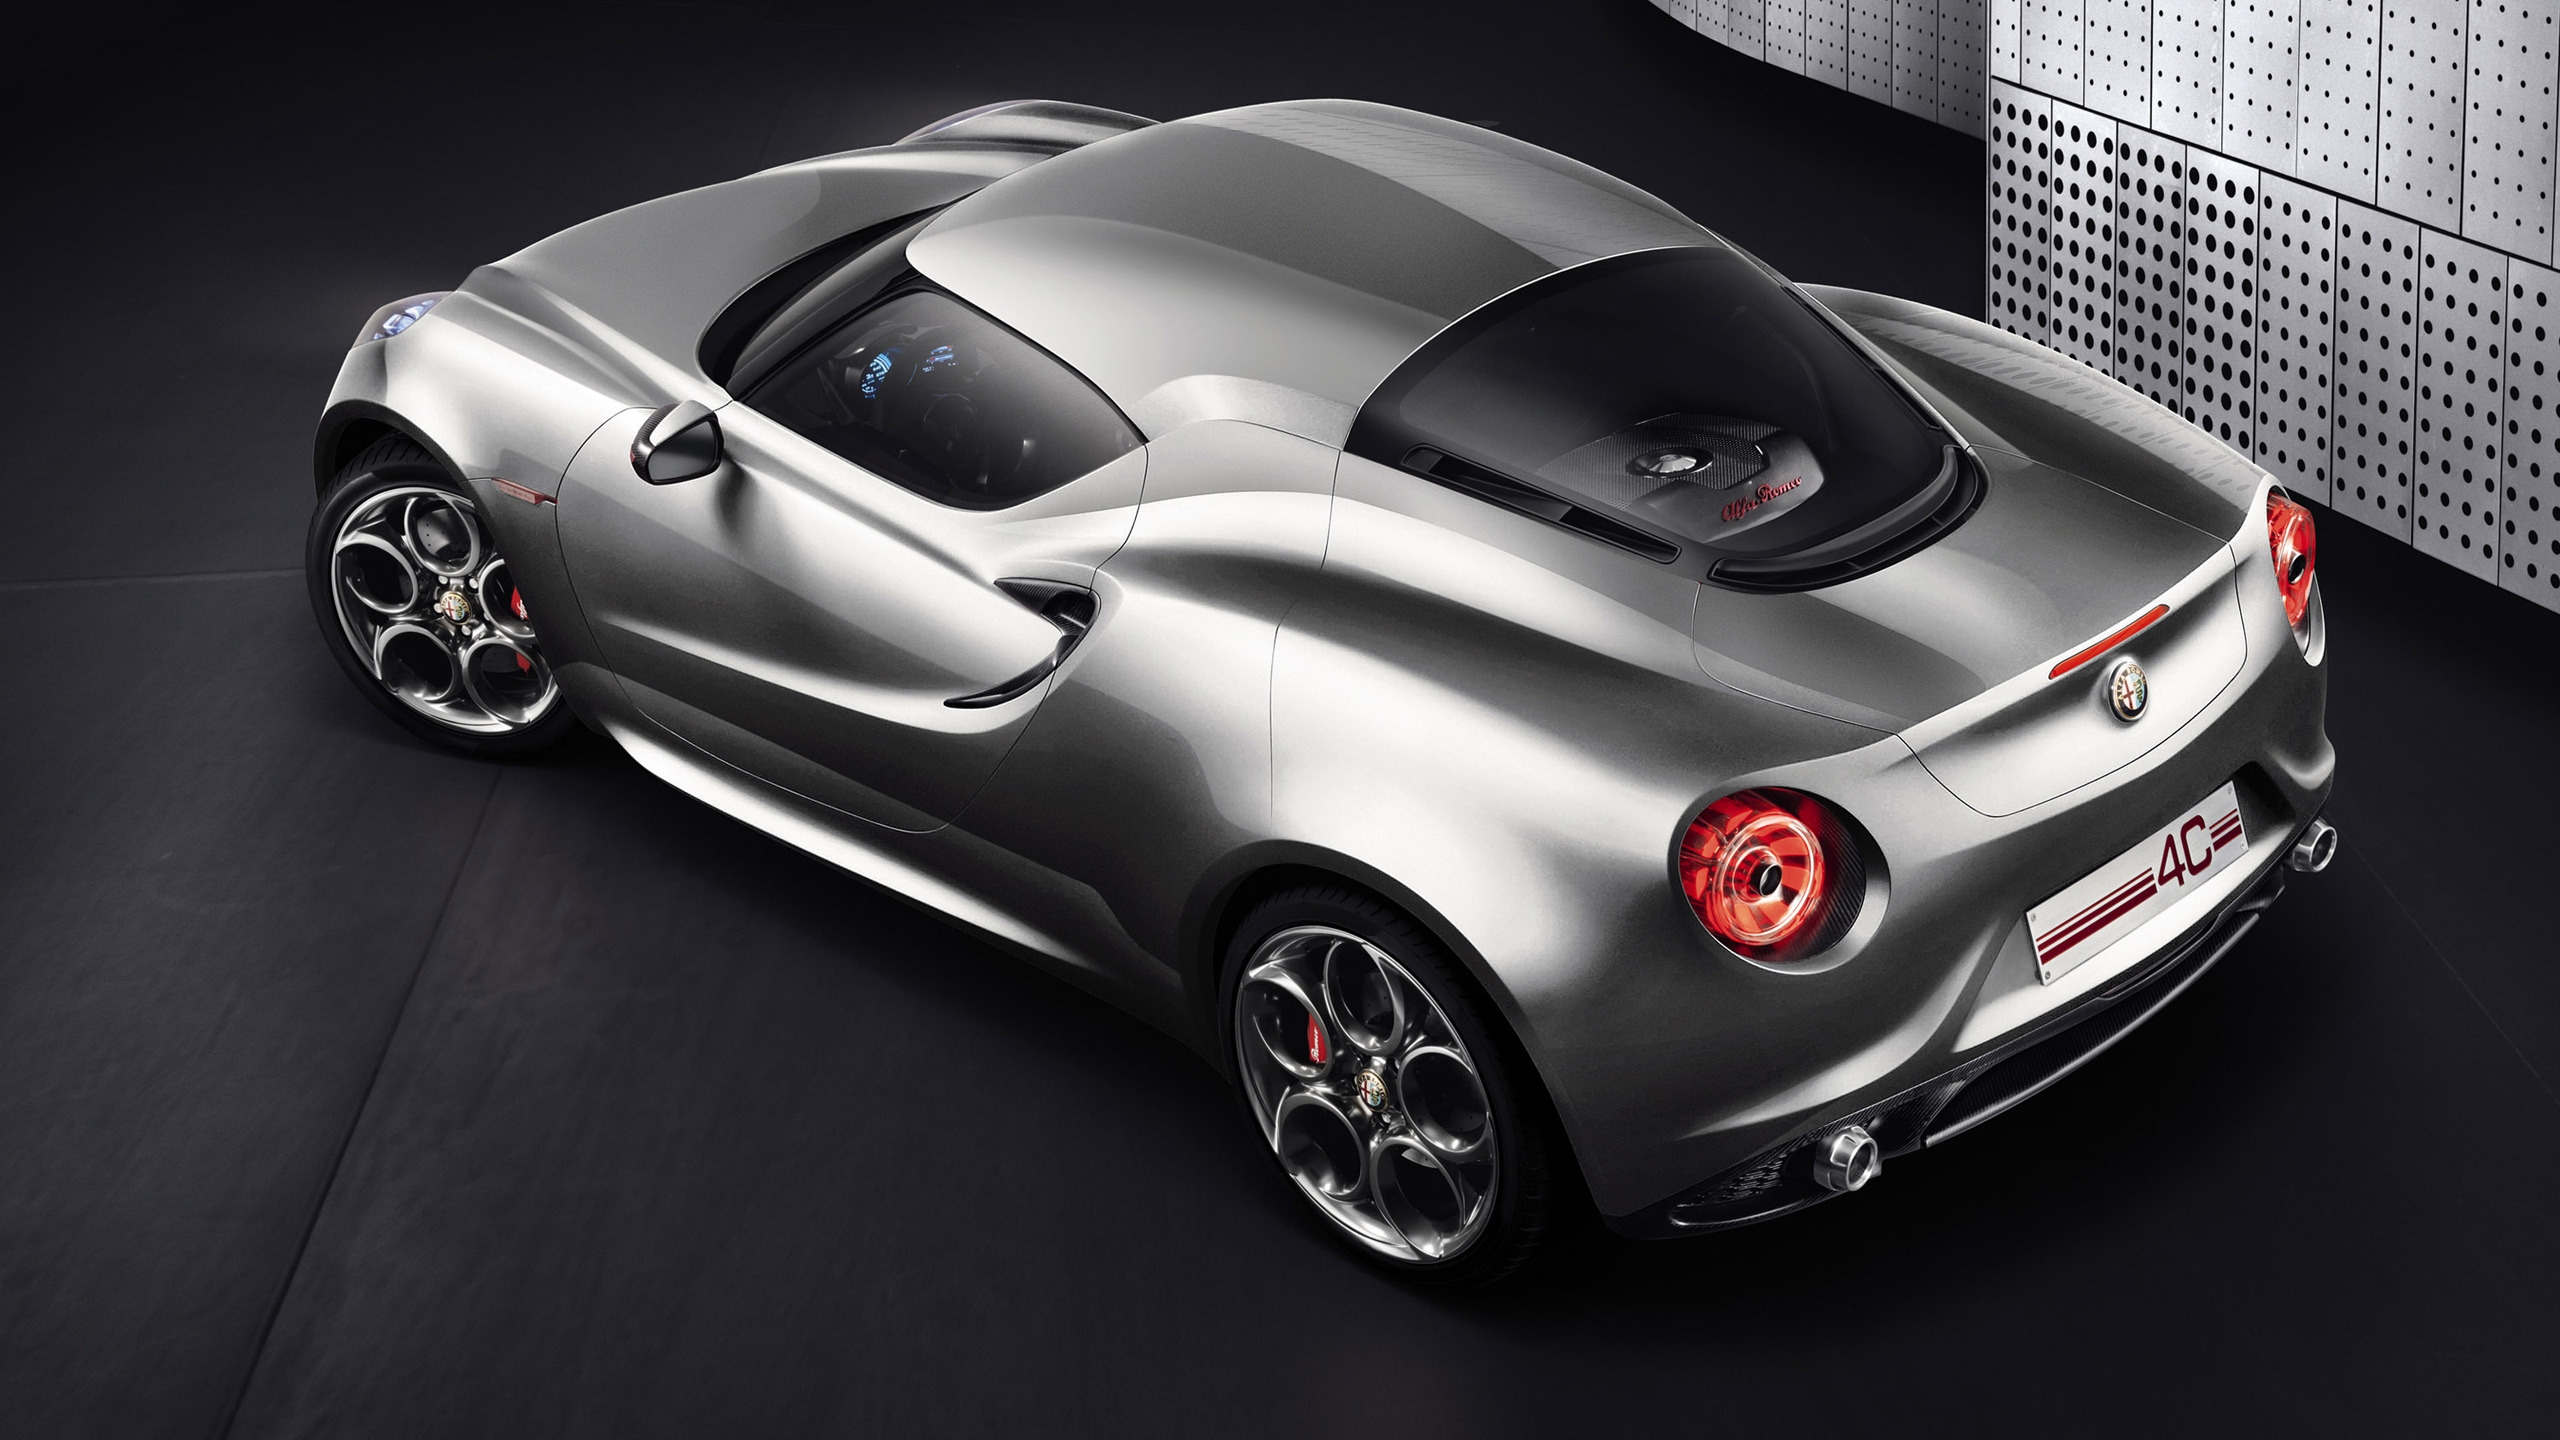 Alfa 4c Concept Rear Top View for 2560x1440 HDTV resolution